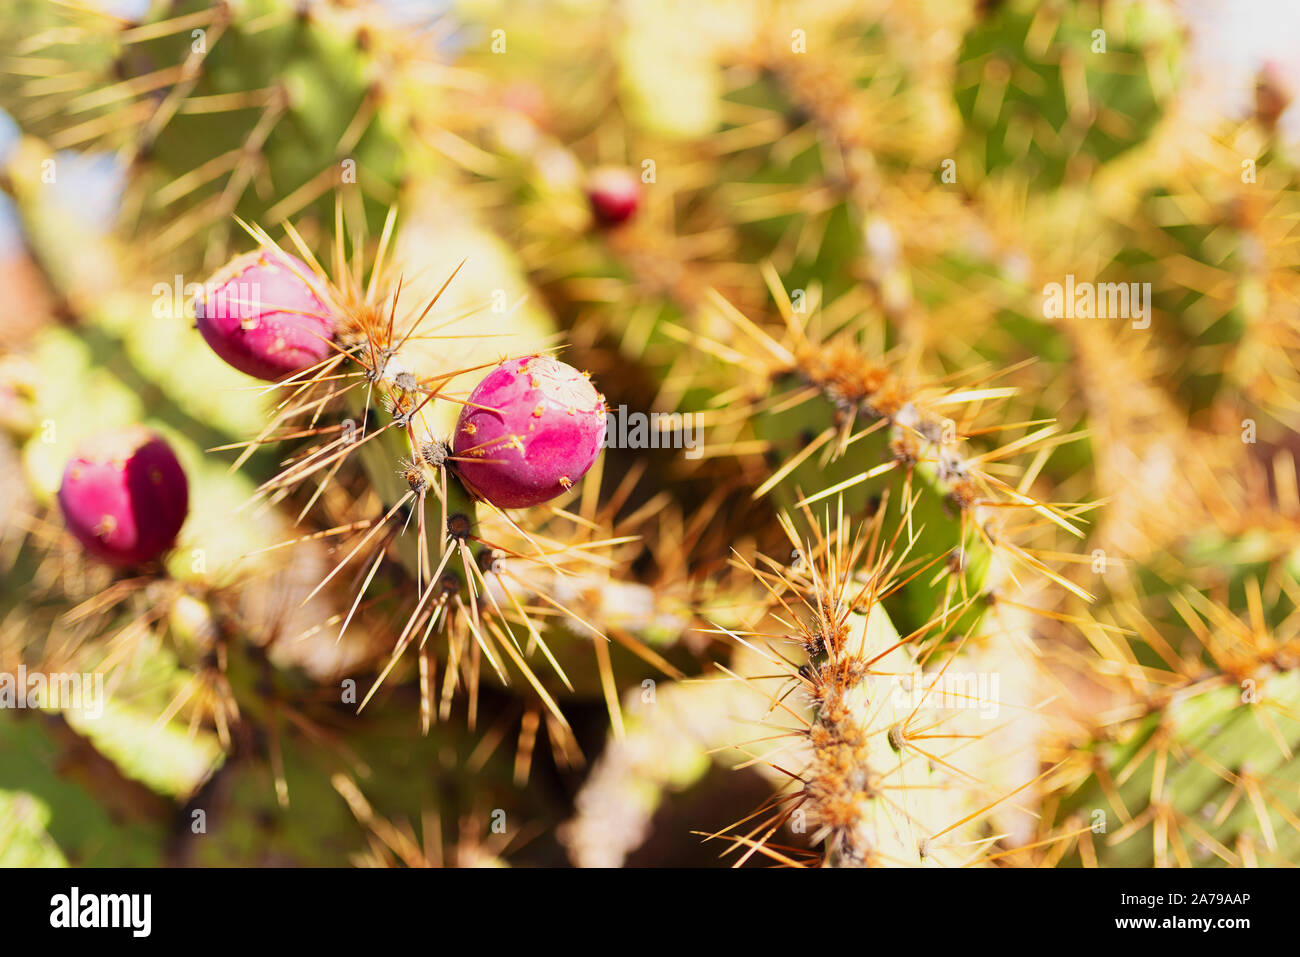 close-up of Opuntia ficus-indica, cactus pear or prickly pear, with red fruits Stock Photo